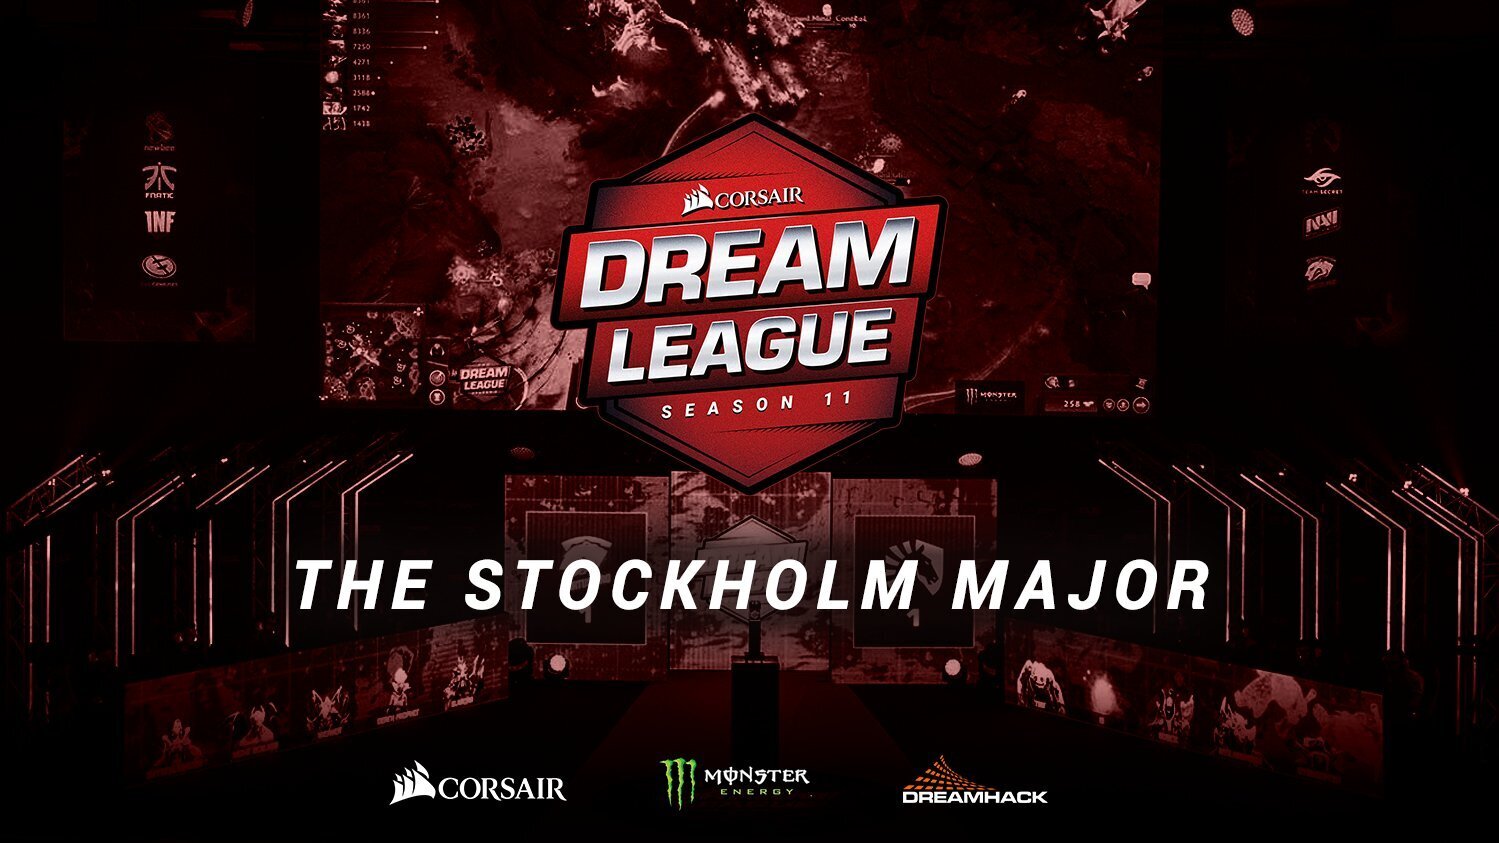 The first round of Regional Qualifiers for DreamLeague Season 11, the Stockholm Major, is complete. Nine teams qualified, with another five to go.